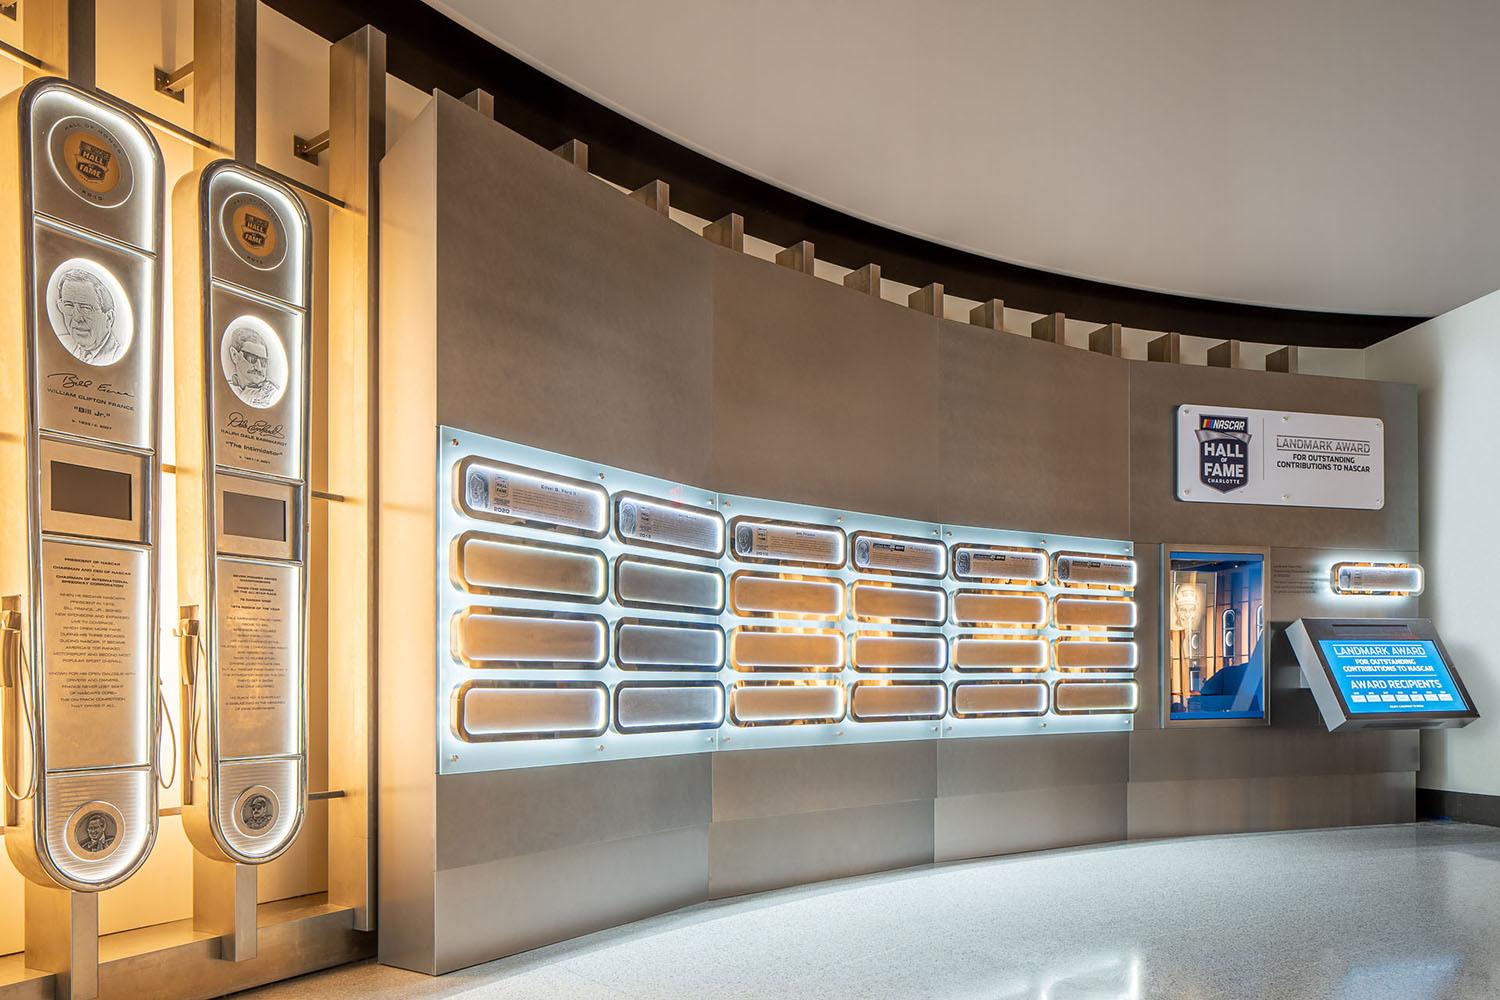 Custom fabrication and installation for Nascar Hall of Fame museum